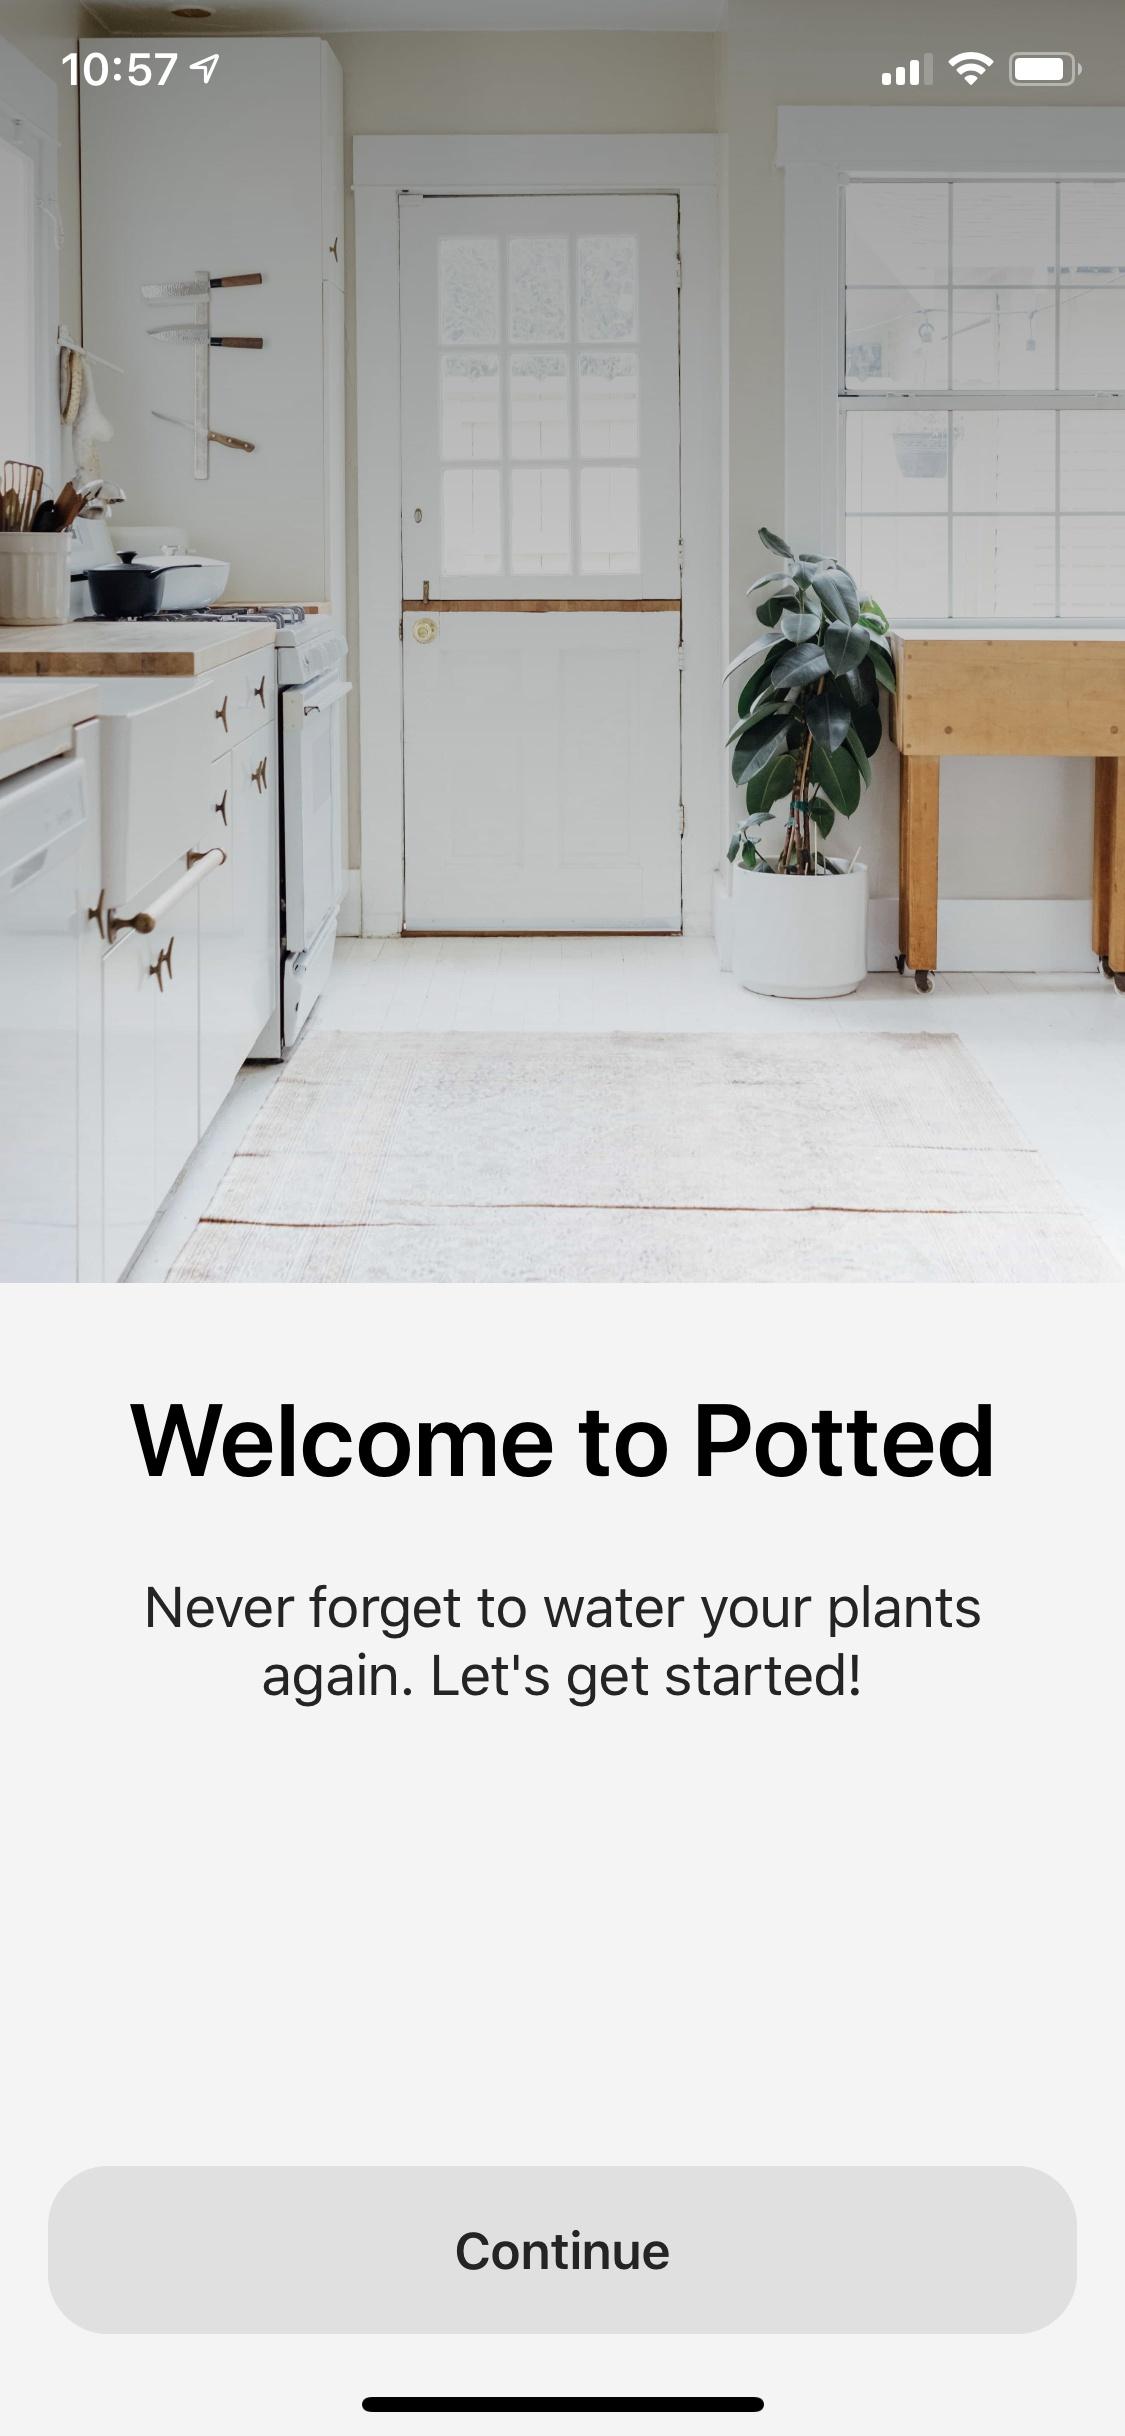 Potted - Plant Water Reminder  启动页特性介绍